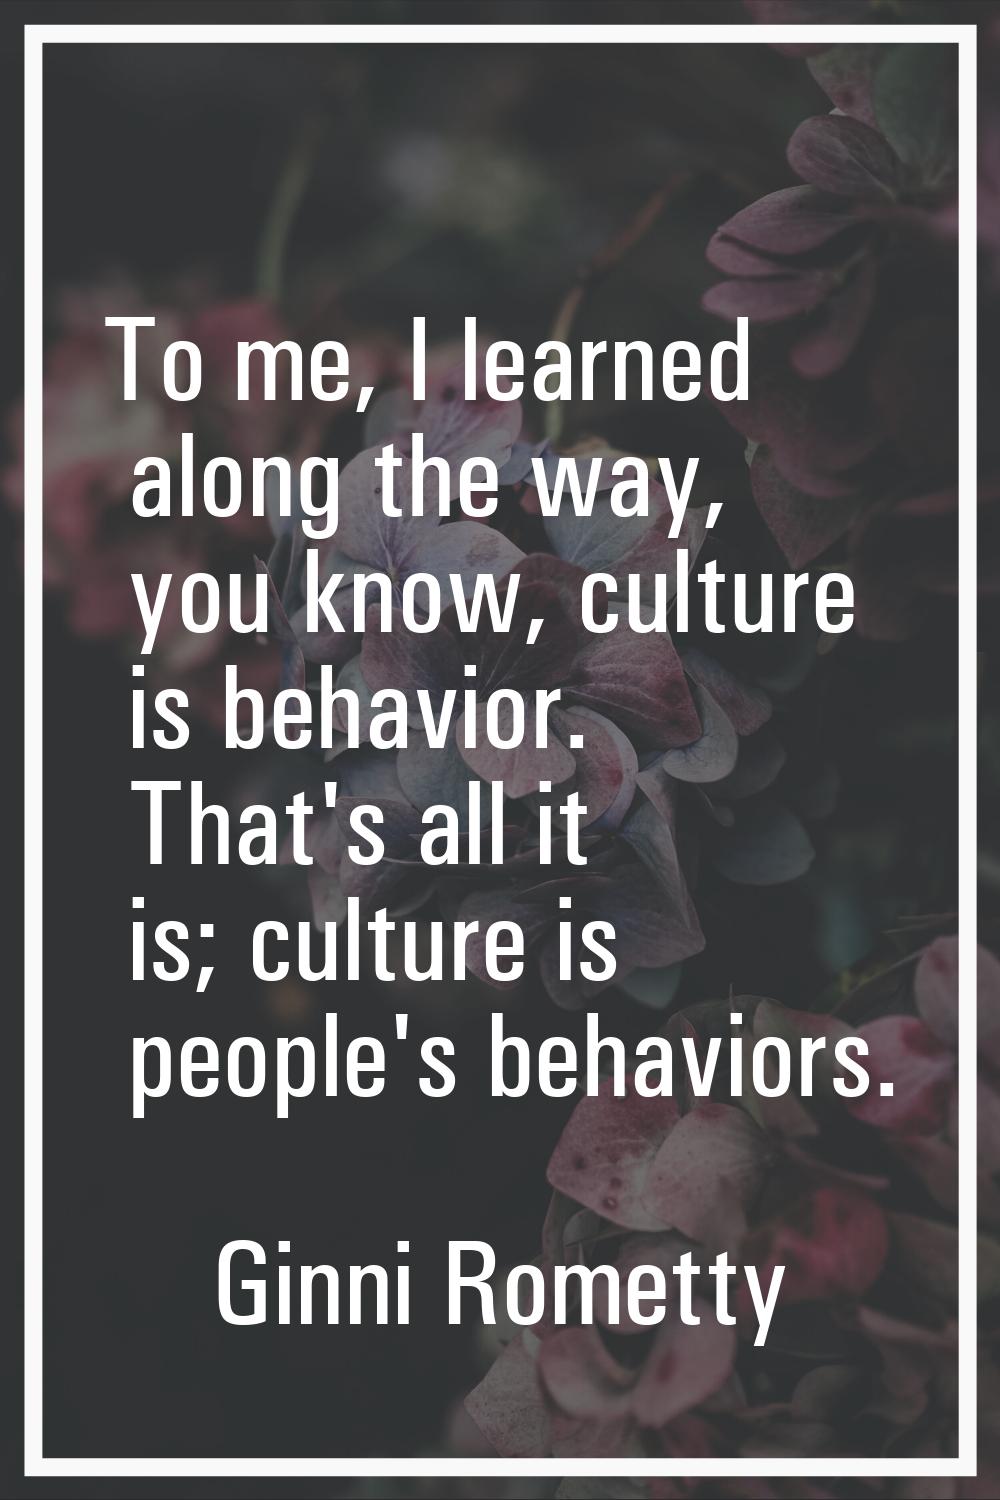 To me, I learned along the way, you know, culture is behavior. That's all it is; culture is people'